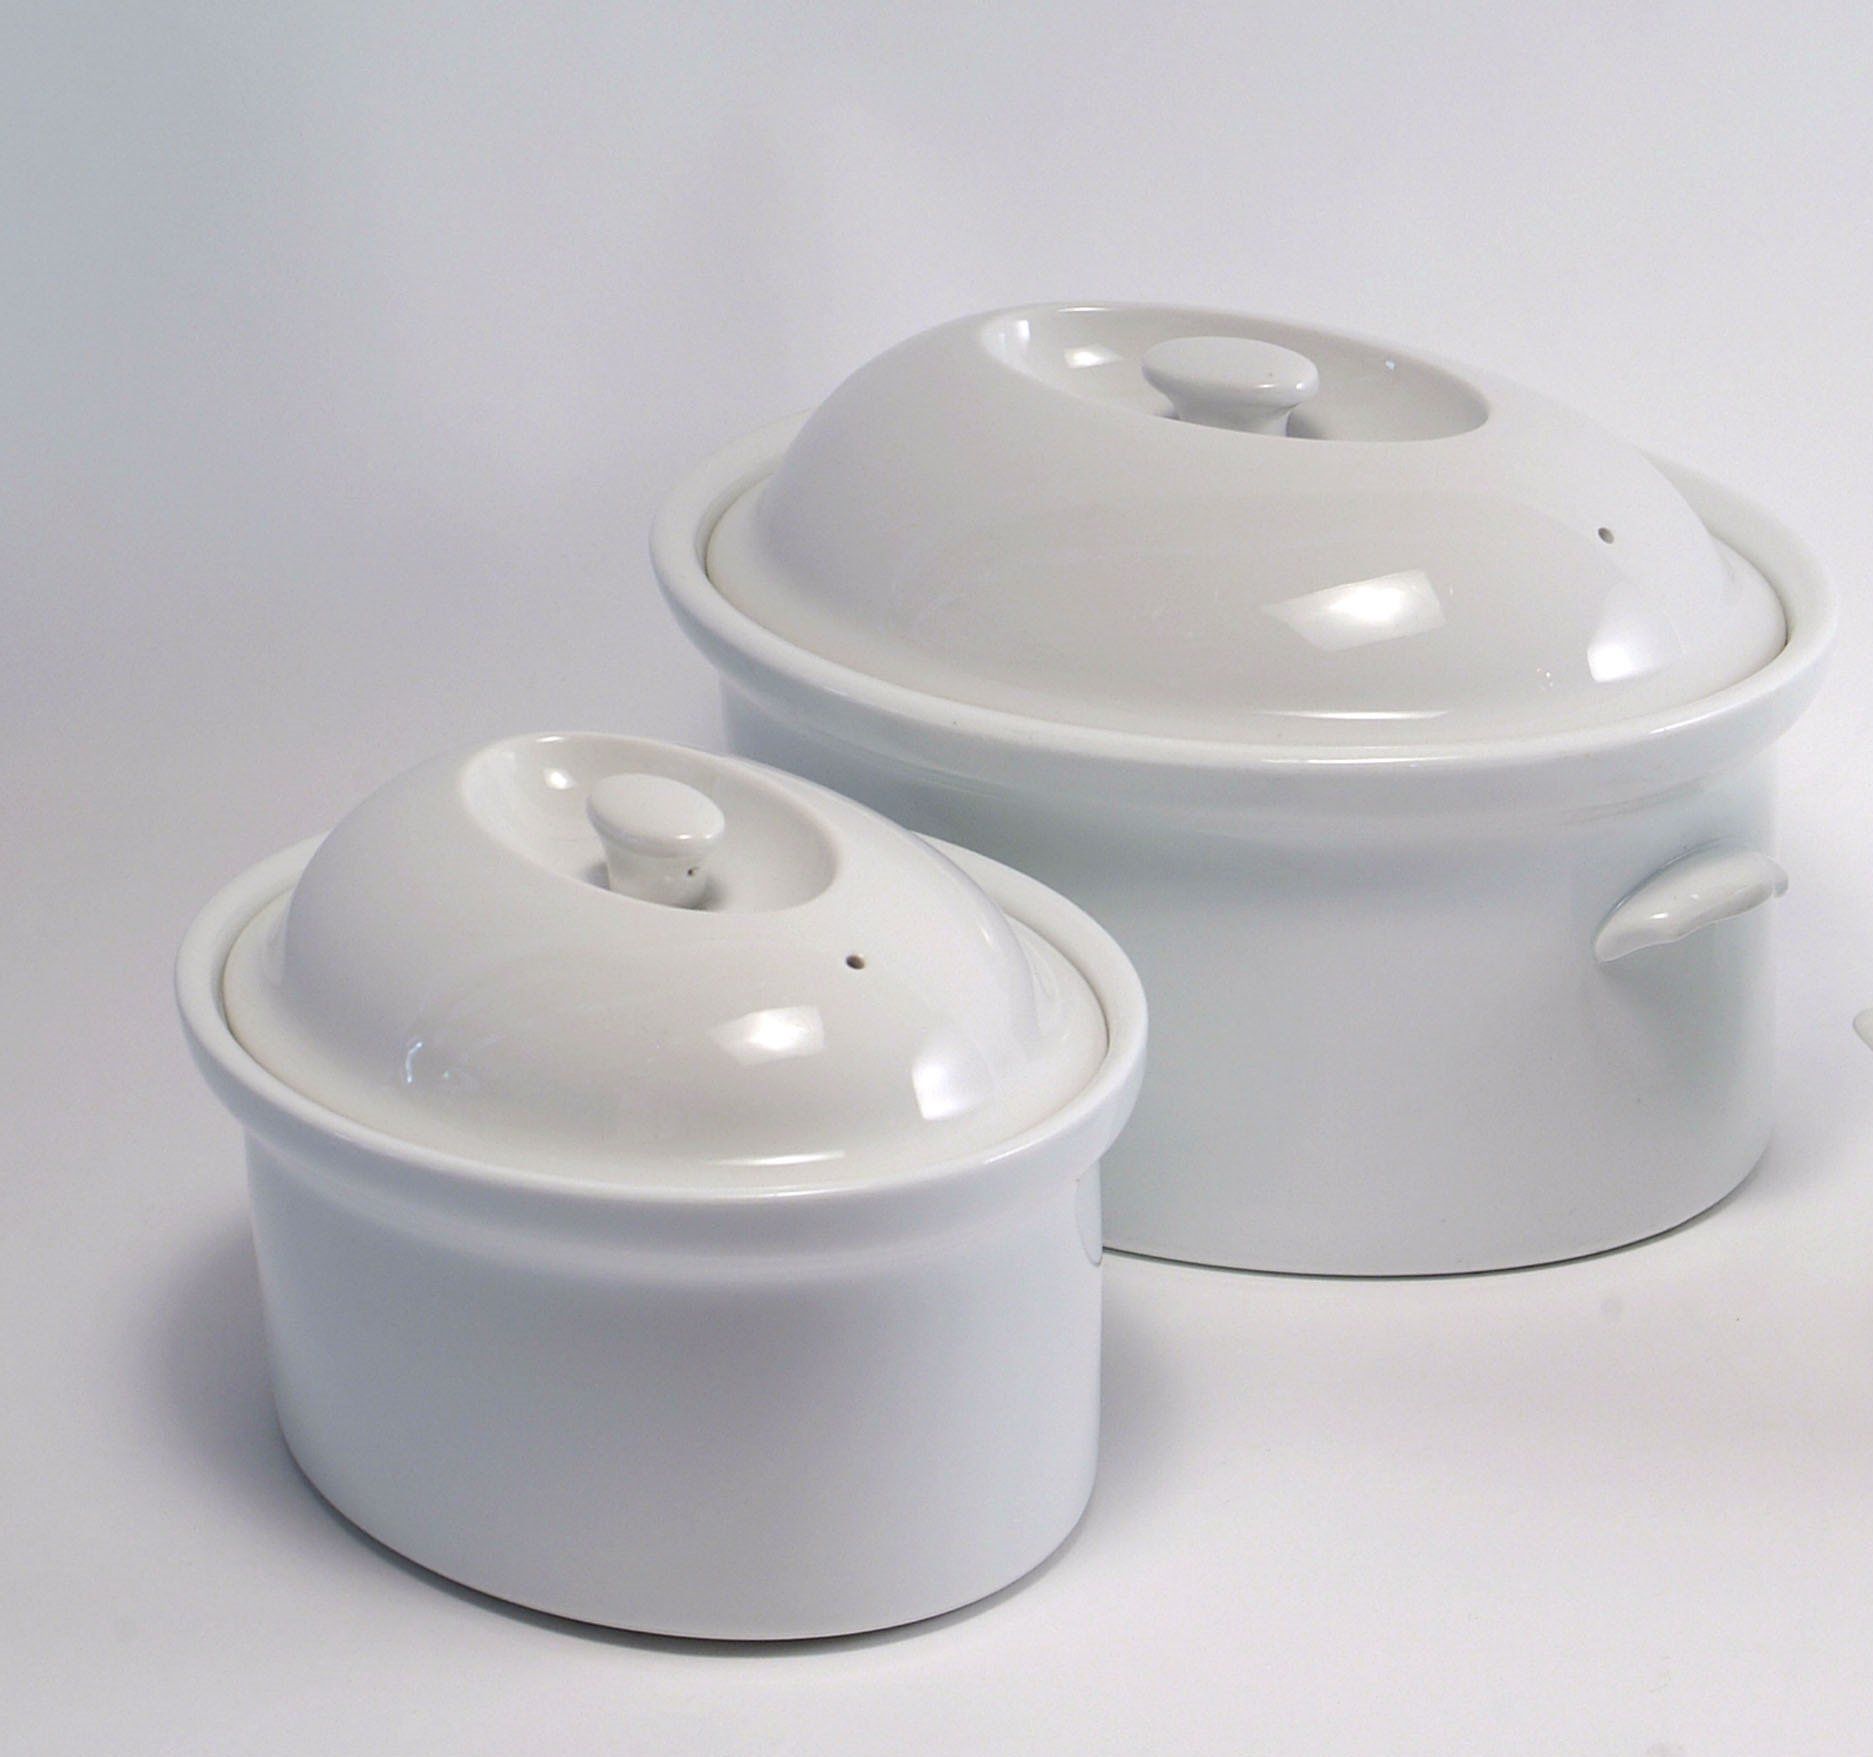 Oval Covered Dish Hire Return Clean or Dirty Option Available